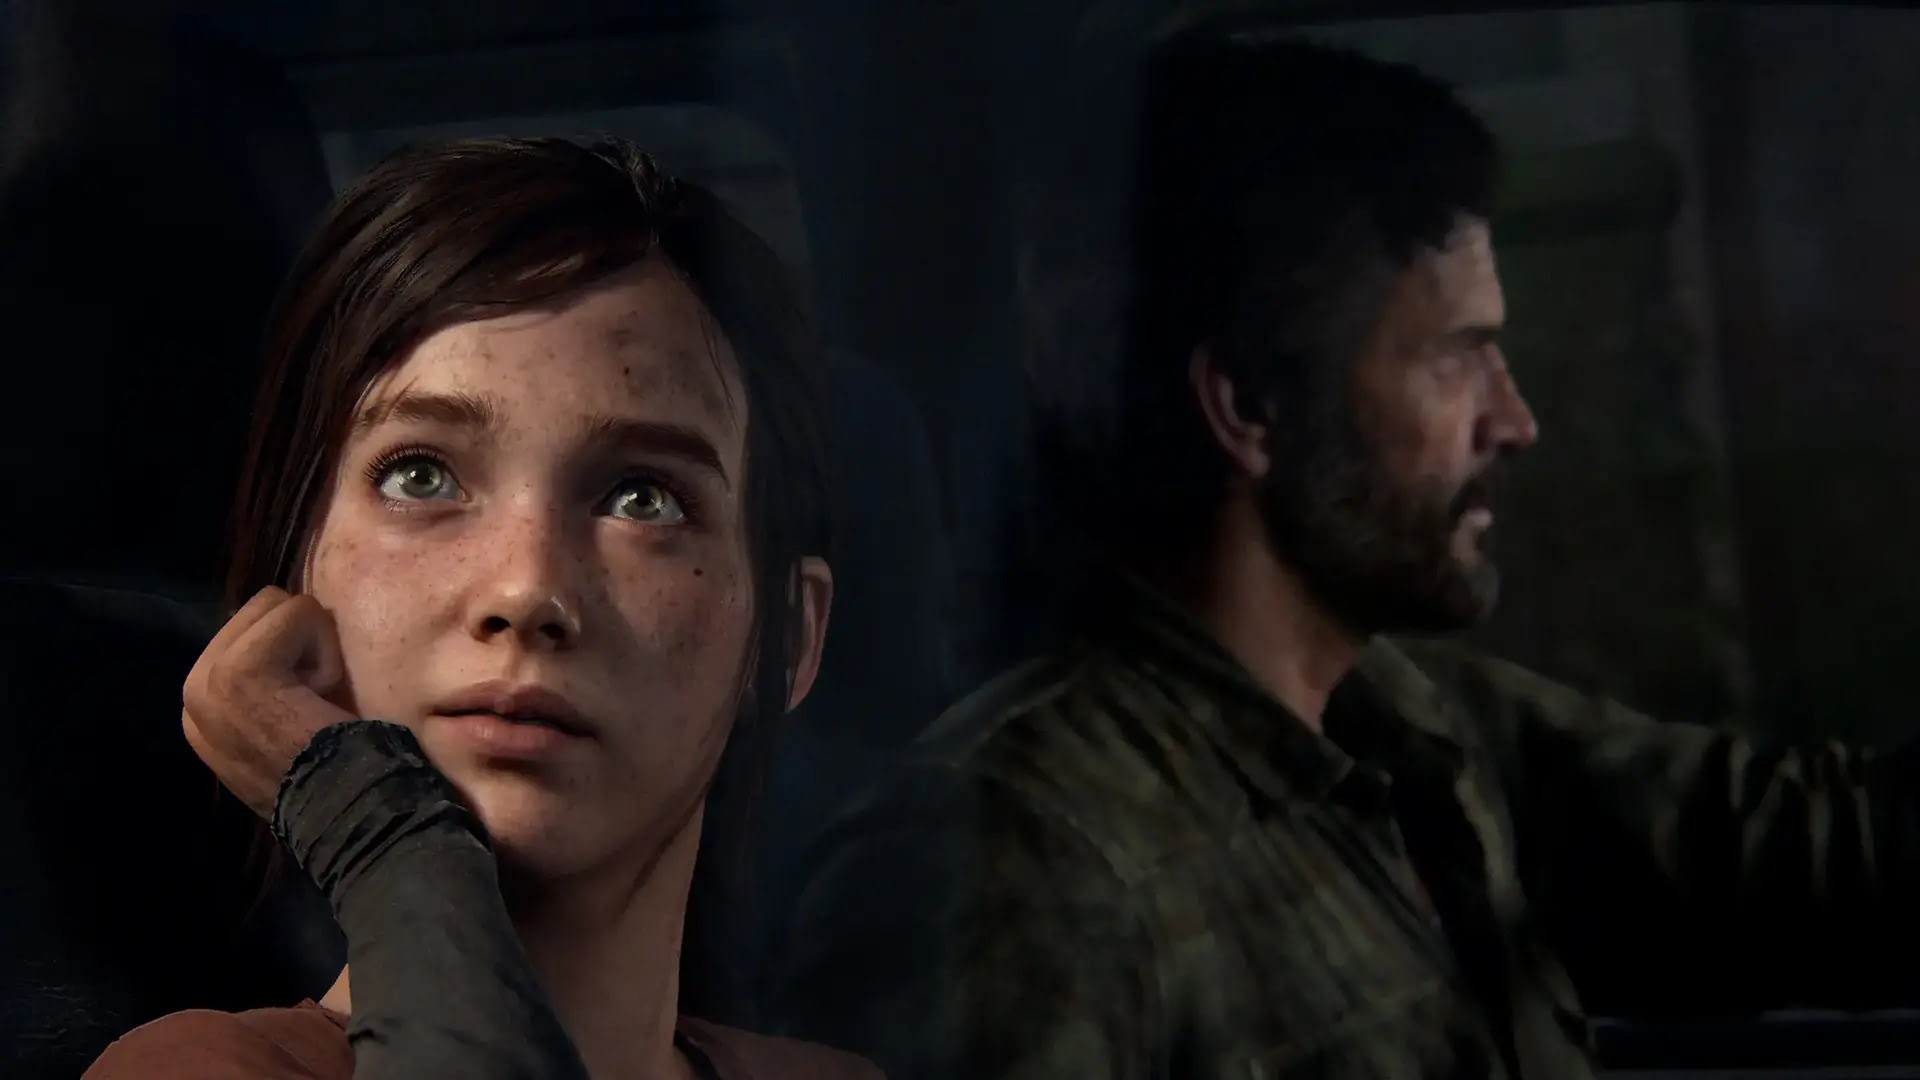 The Last of Us Part I, Ellie looking out the car window while Joel drives in the background